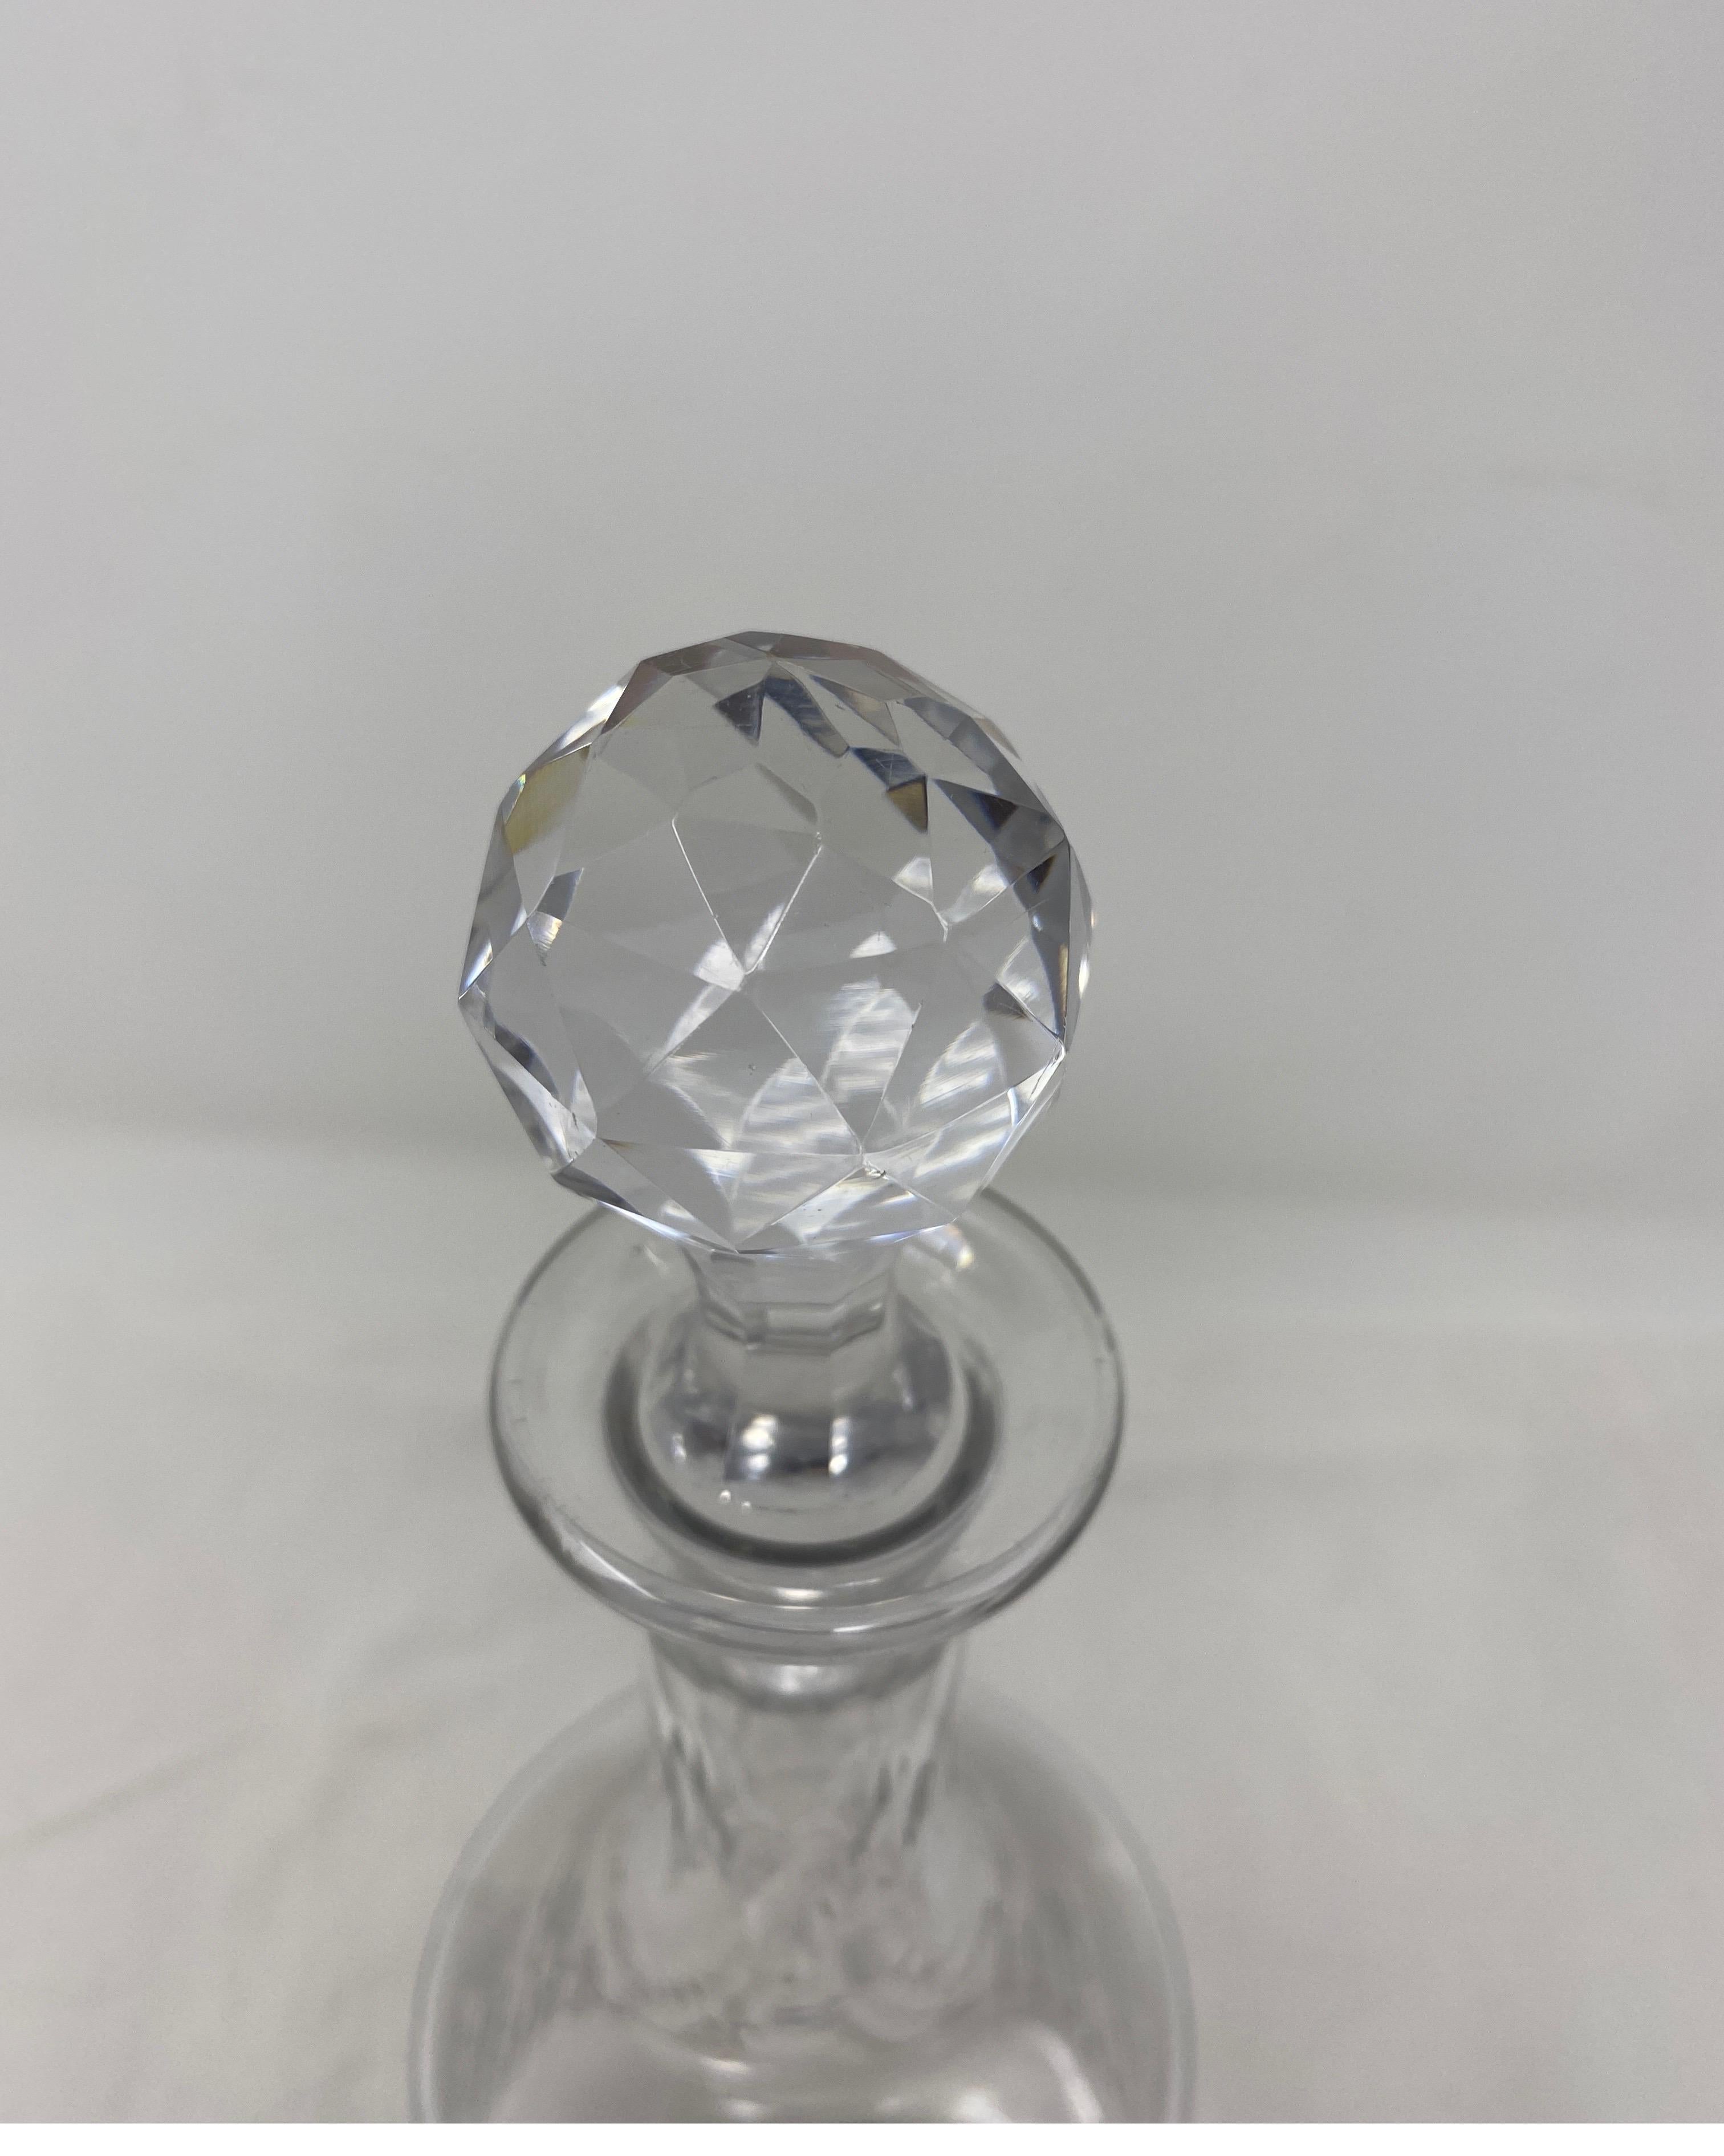 Antique Baccarat crystal decanter with stopper. 19th century.